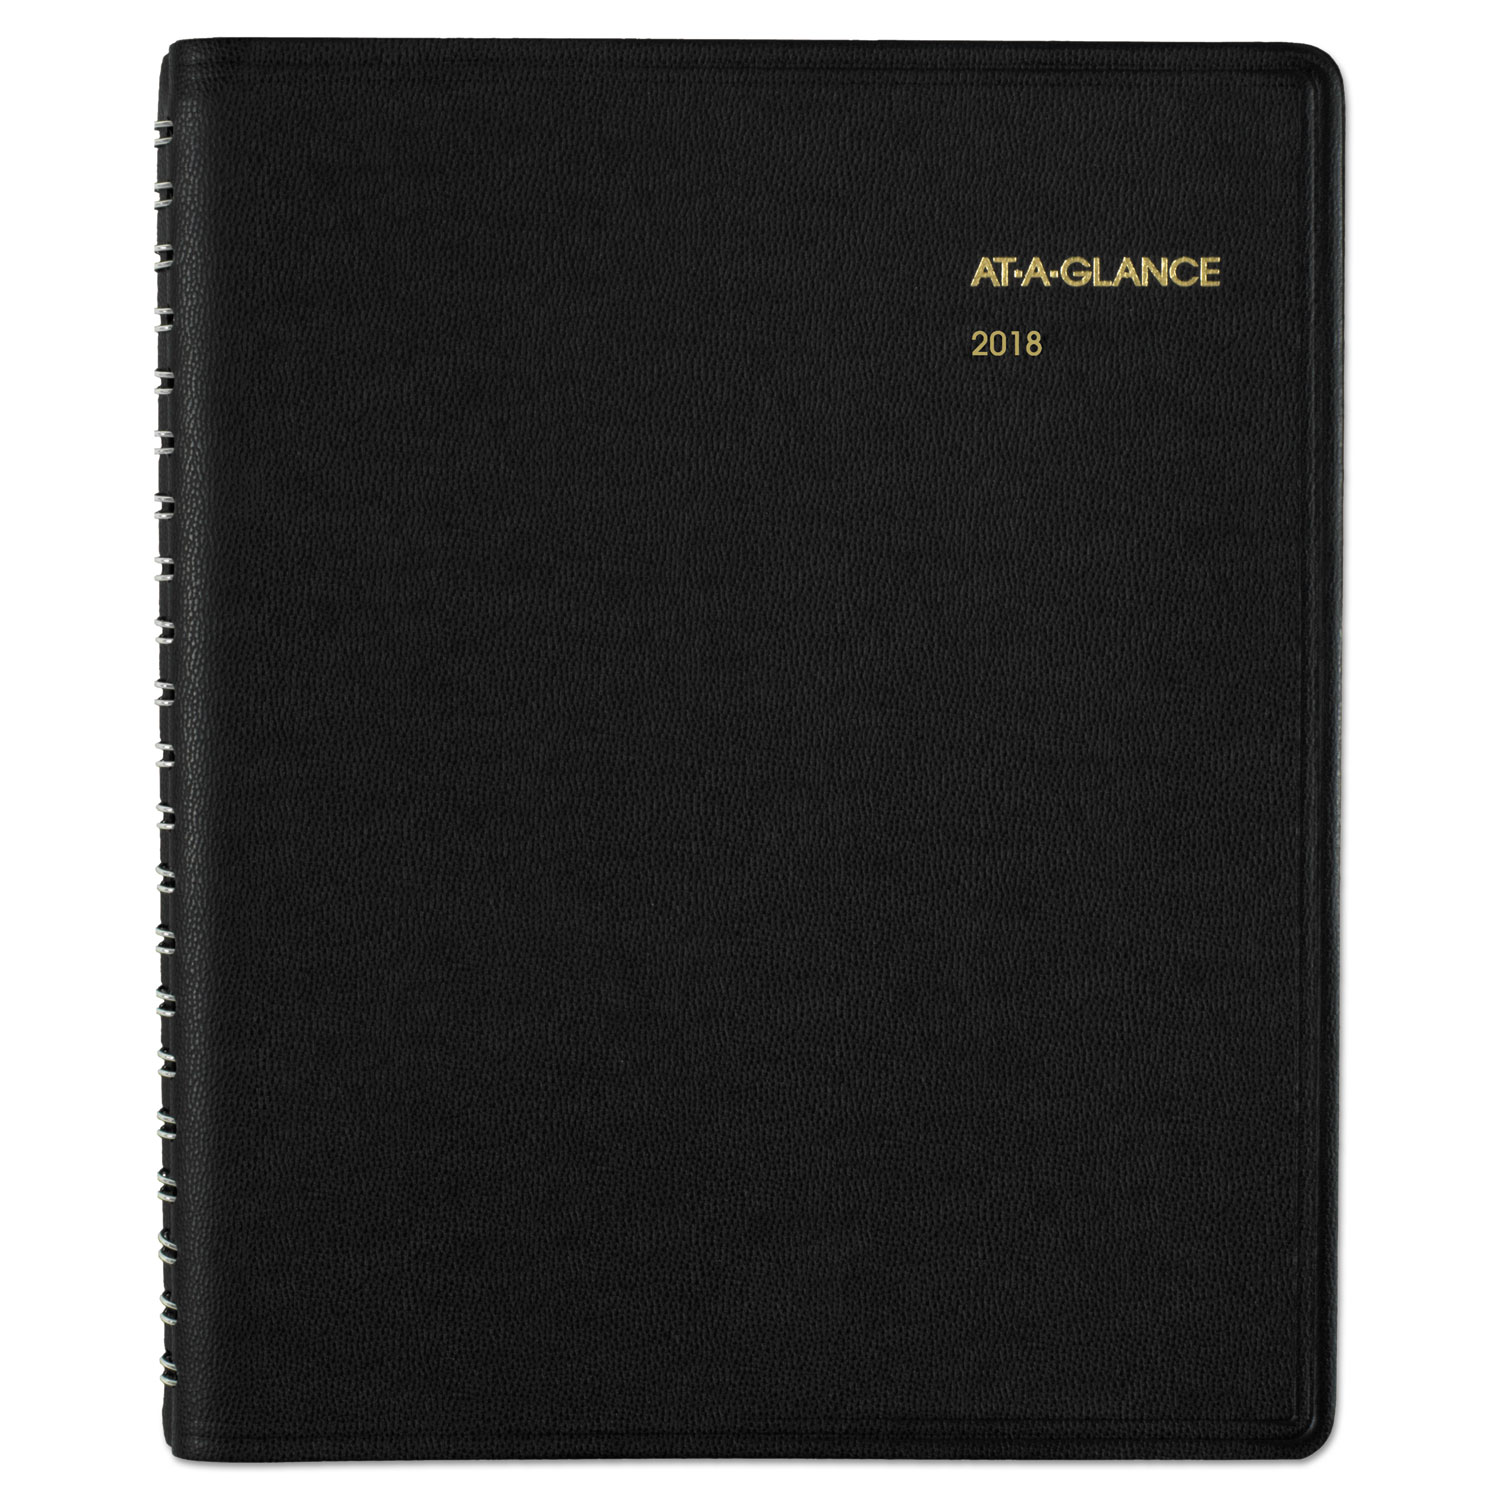 24-Hour Daily Appointment Book, 8 1/2 x 10 7/8, White, 2018